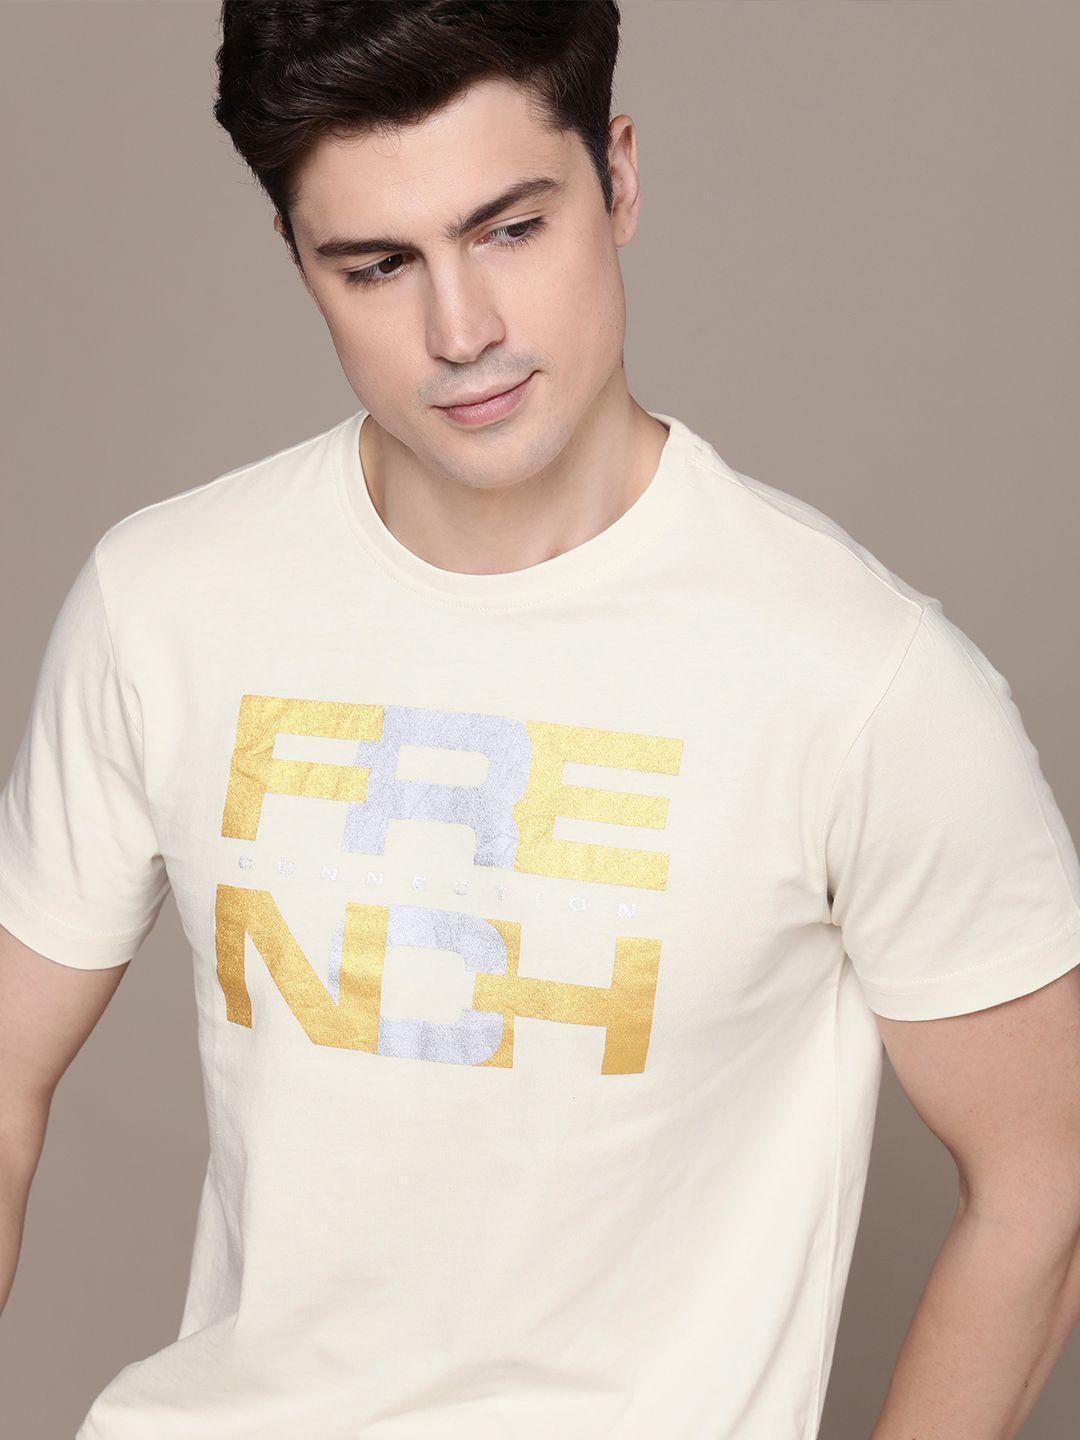 french connection brand logo printed pure cotton t-shirt